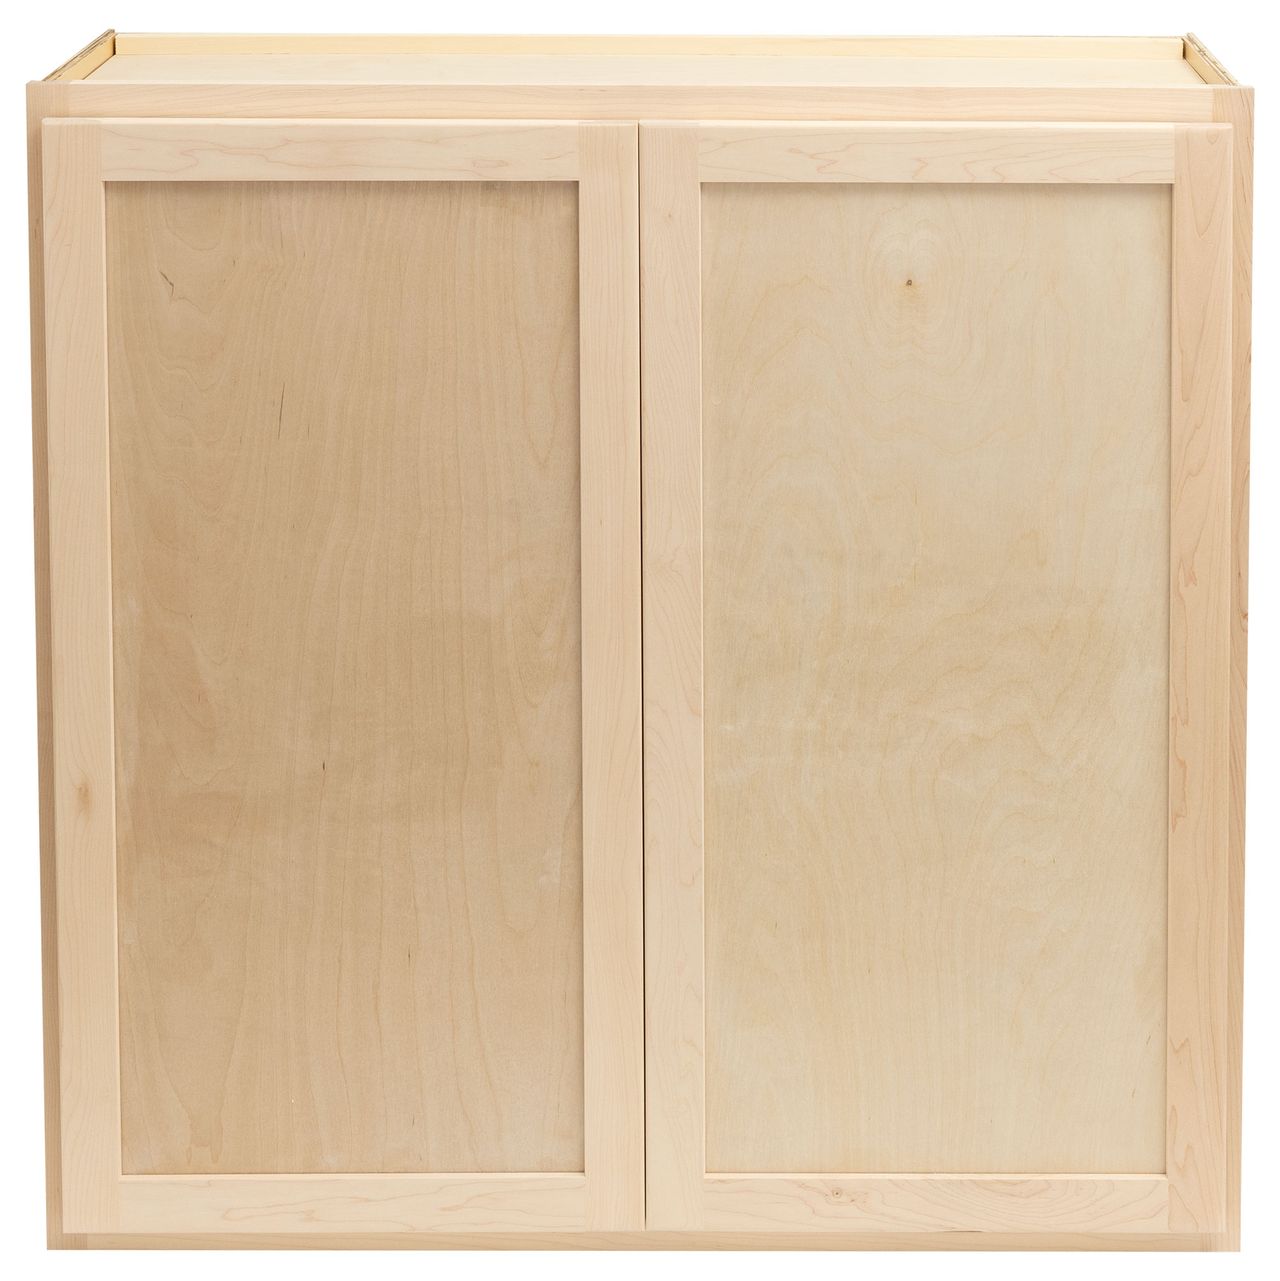 Quicklock RTA (Ready-to-Assemble) Raw Maple Wall Cabinet- Large 36" x (27", 30", 33", 36"W)